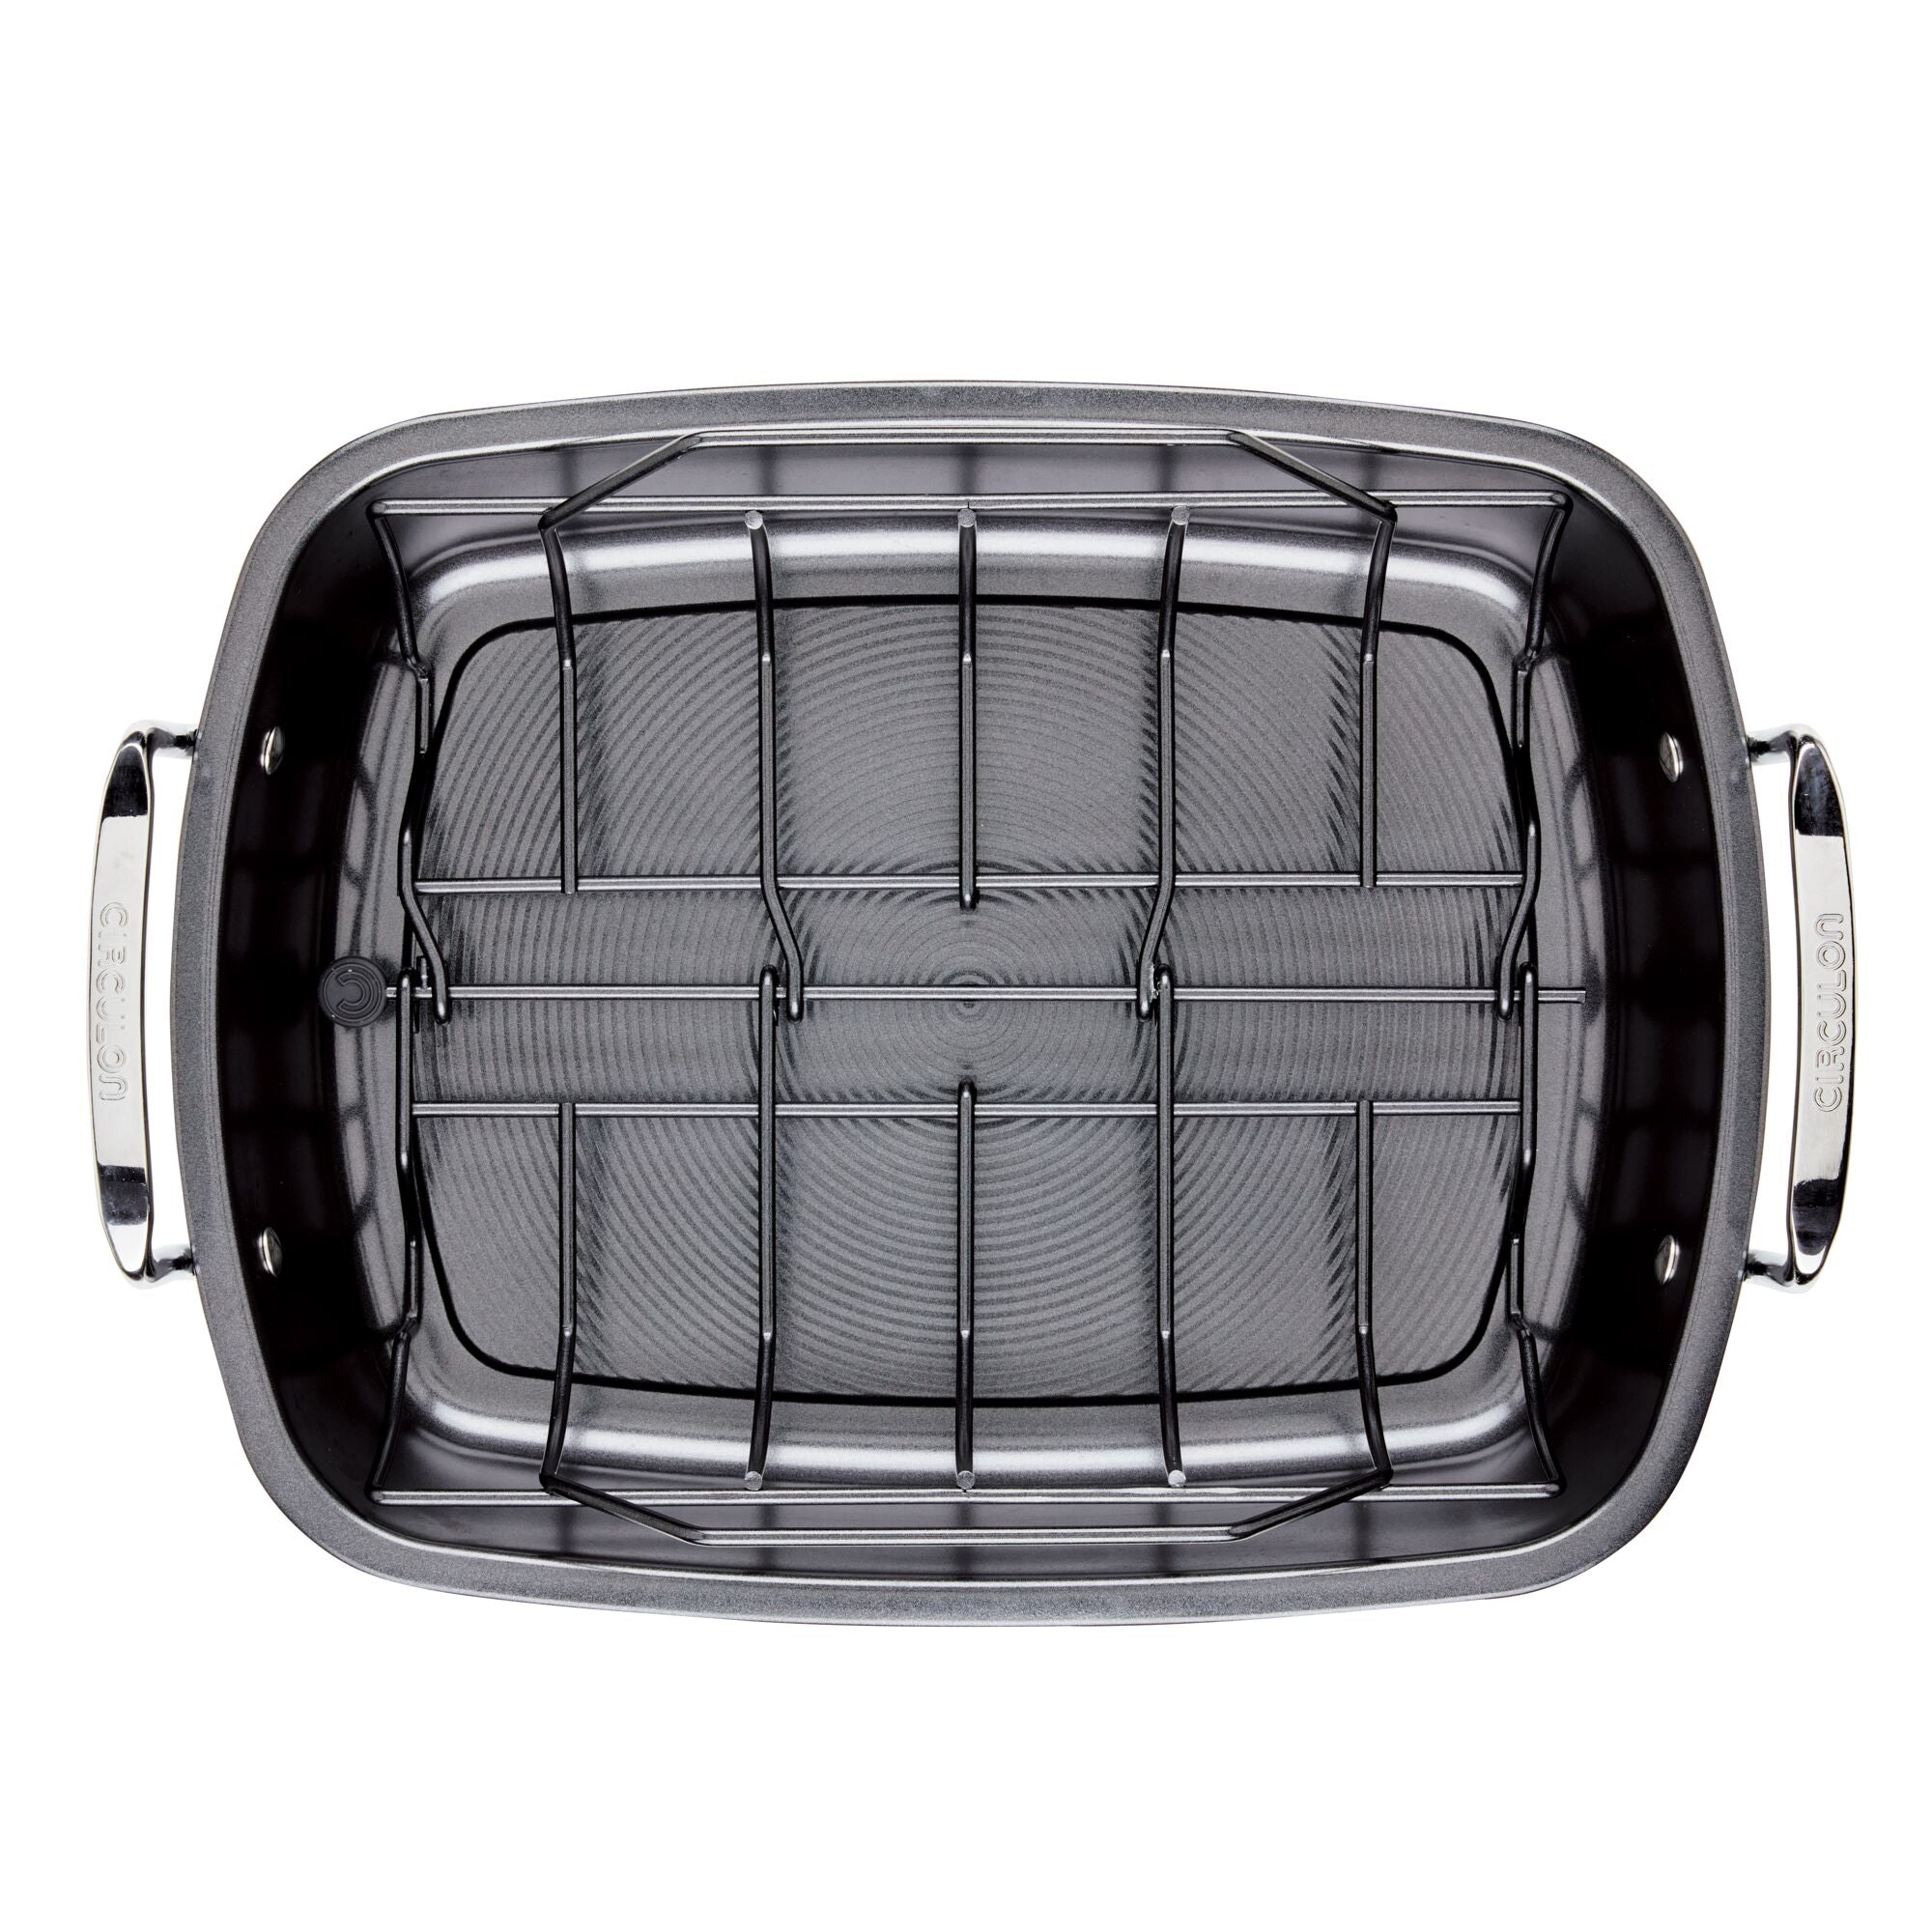 The Best Roasting Pans with Racks